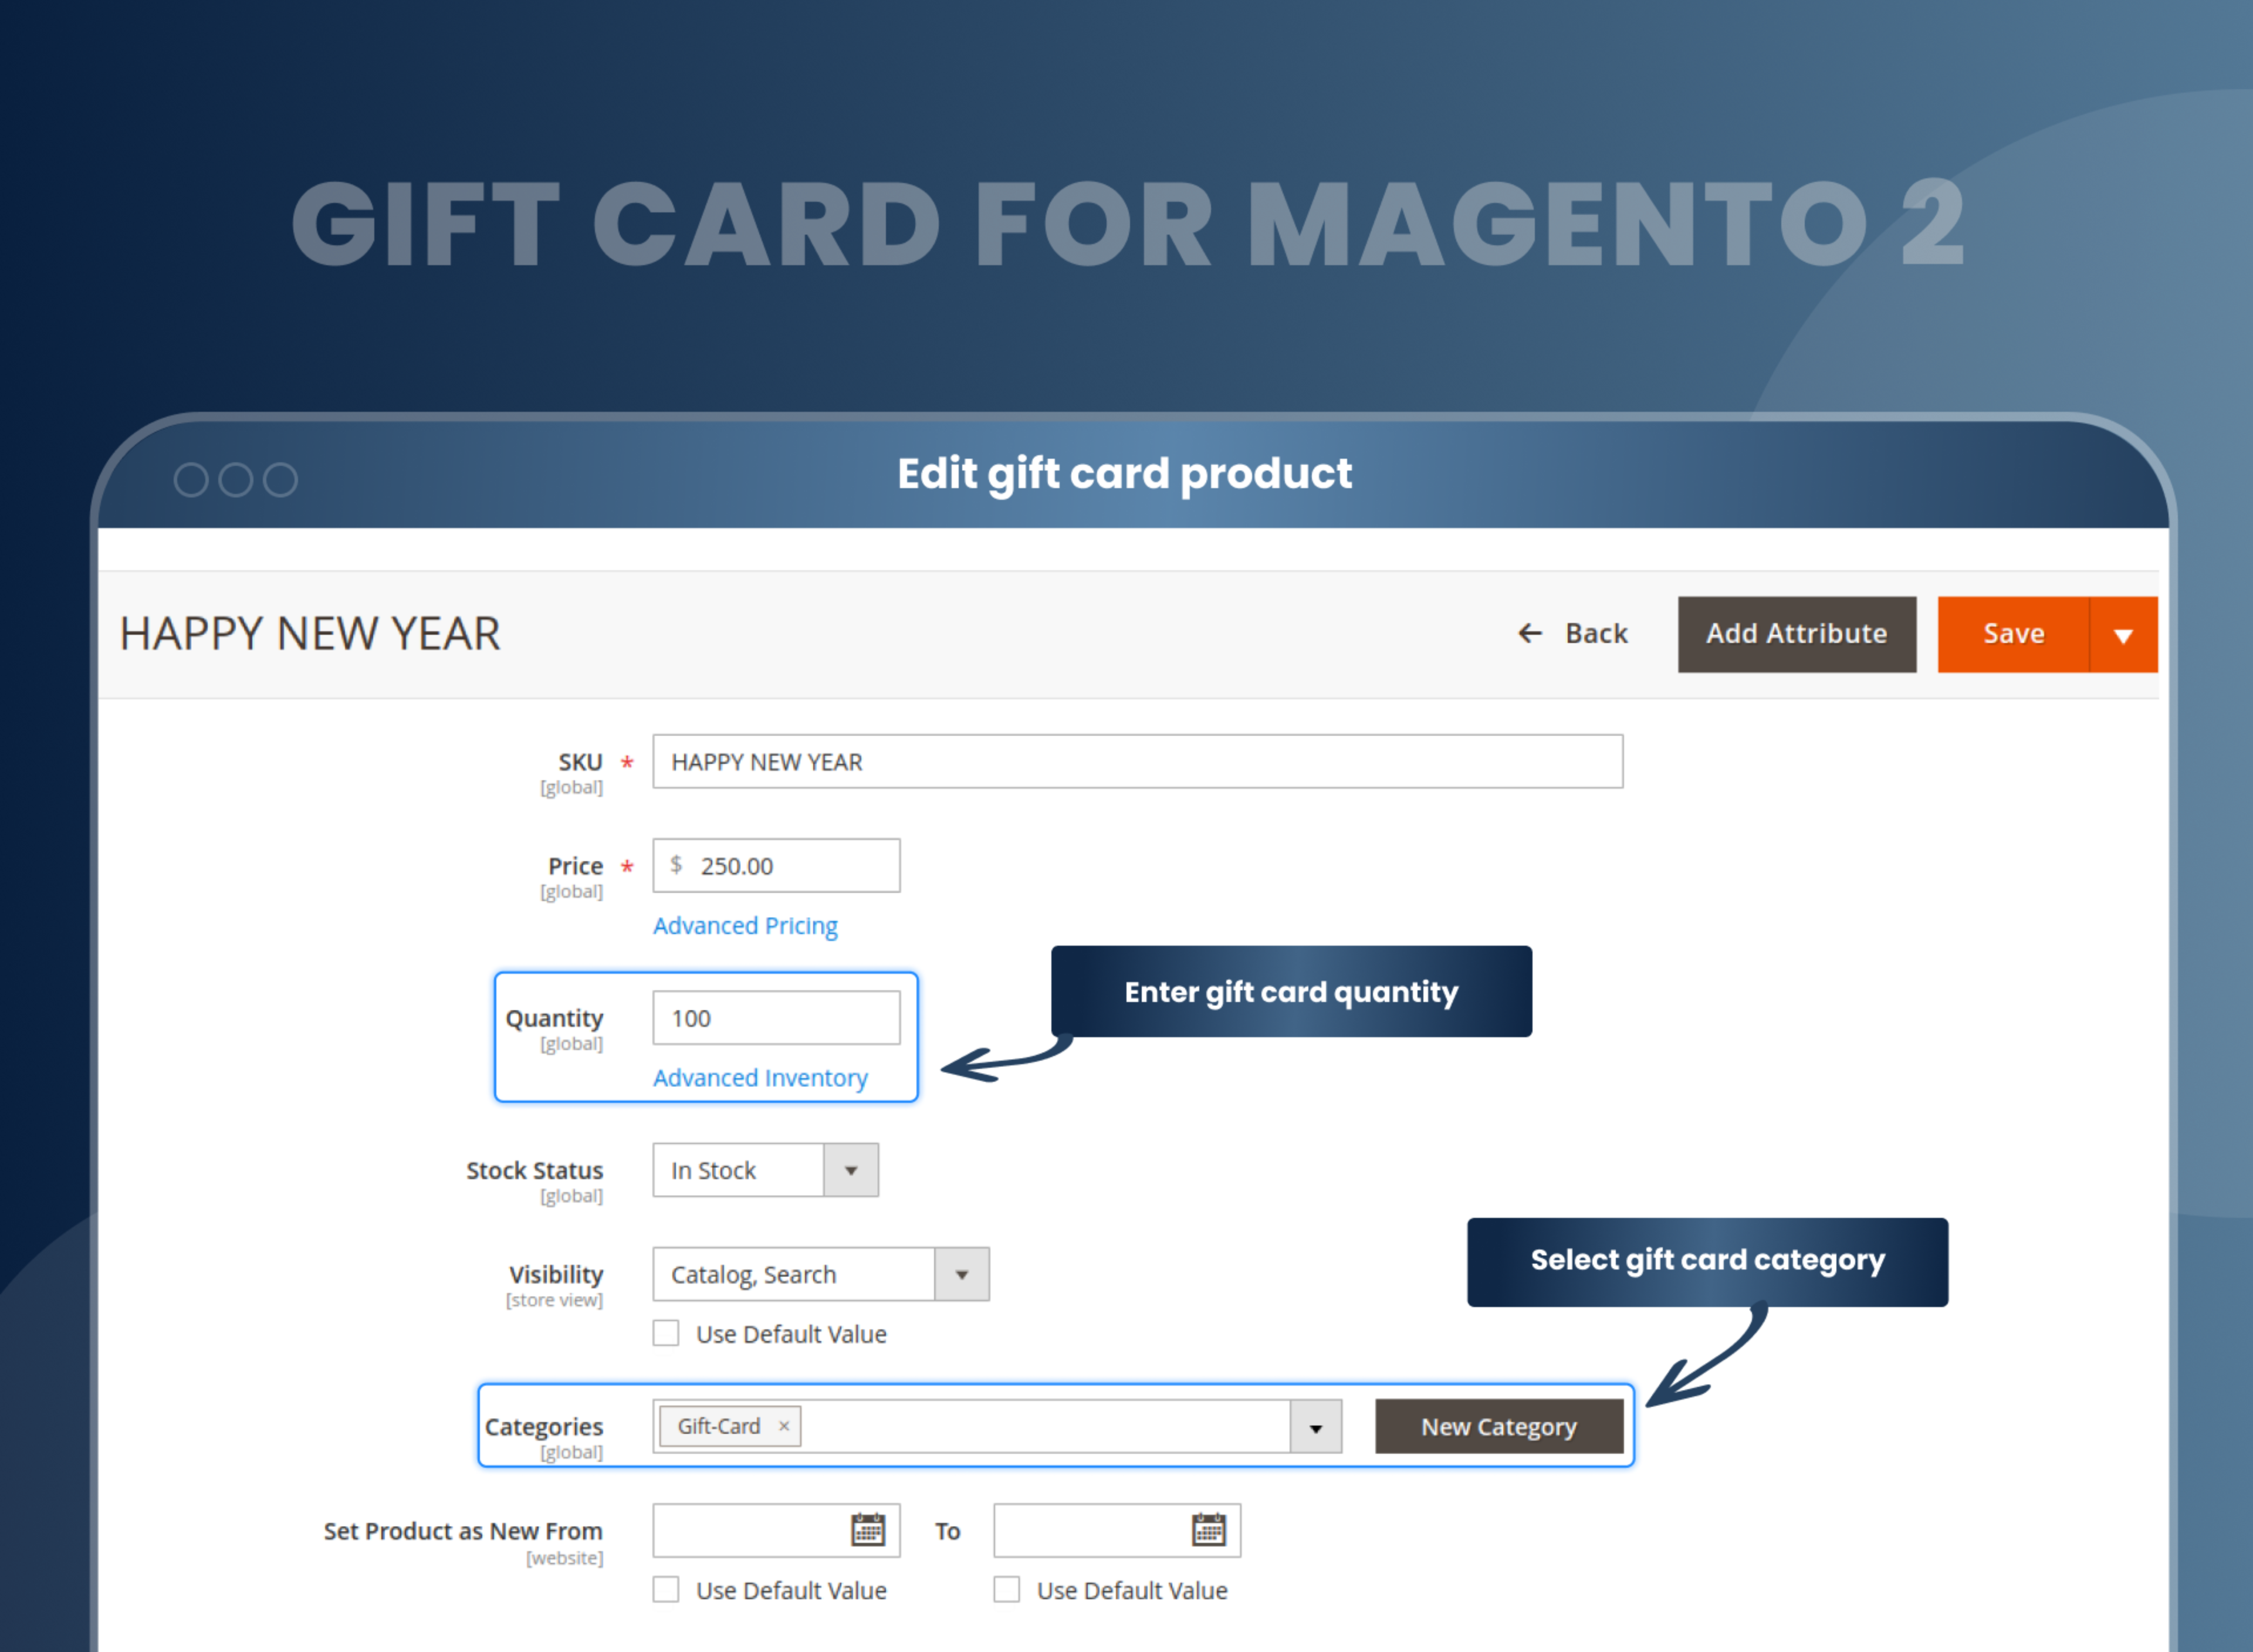 Edit gift card product